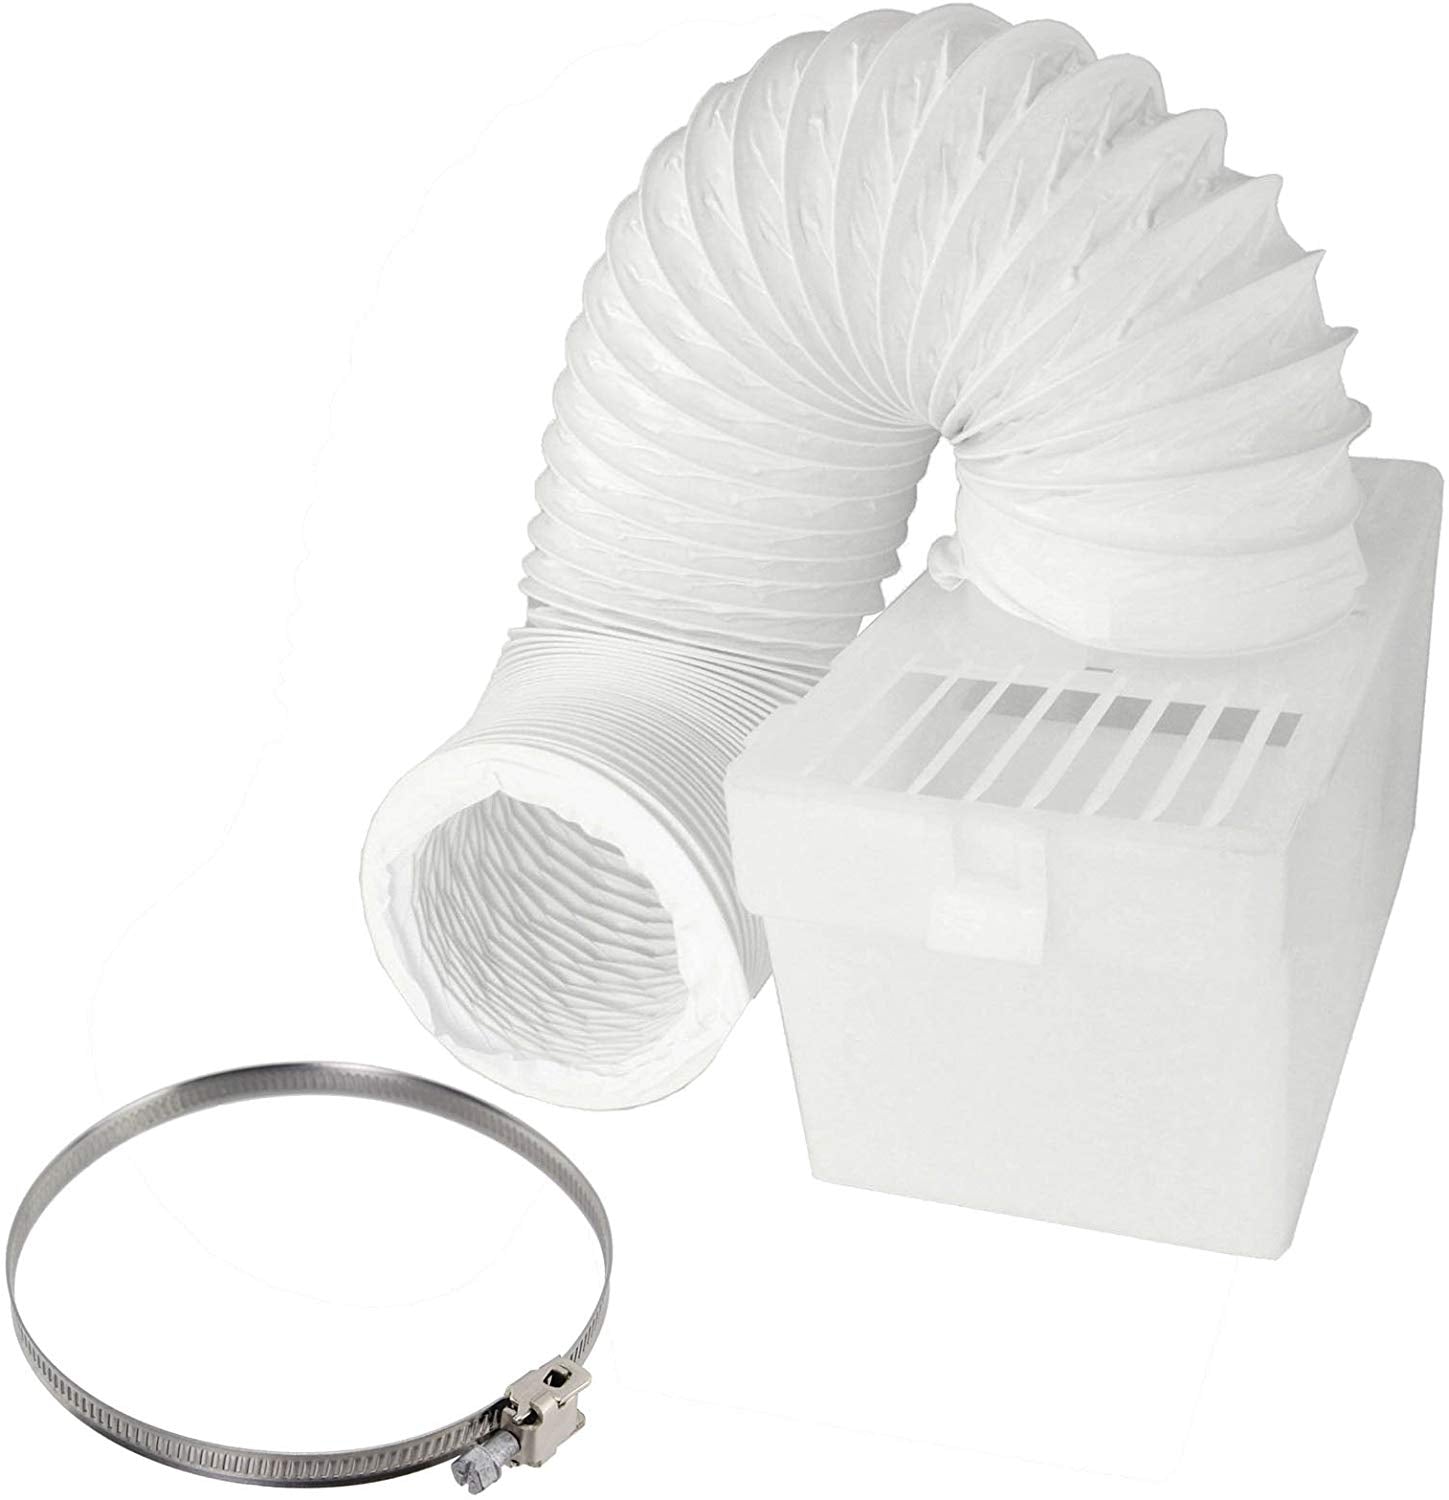 Condenser Vent Box & Hose Kit With Screw Clip for Lamona Vented Tumble Dryer (4" / 100mm Diameter)